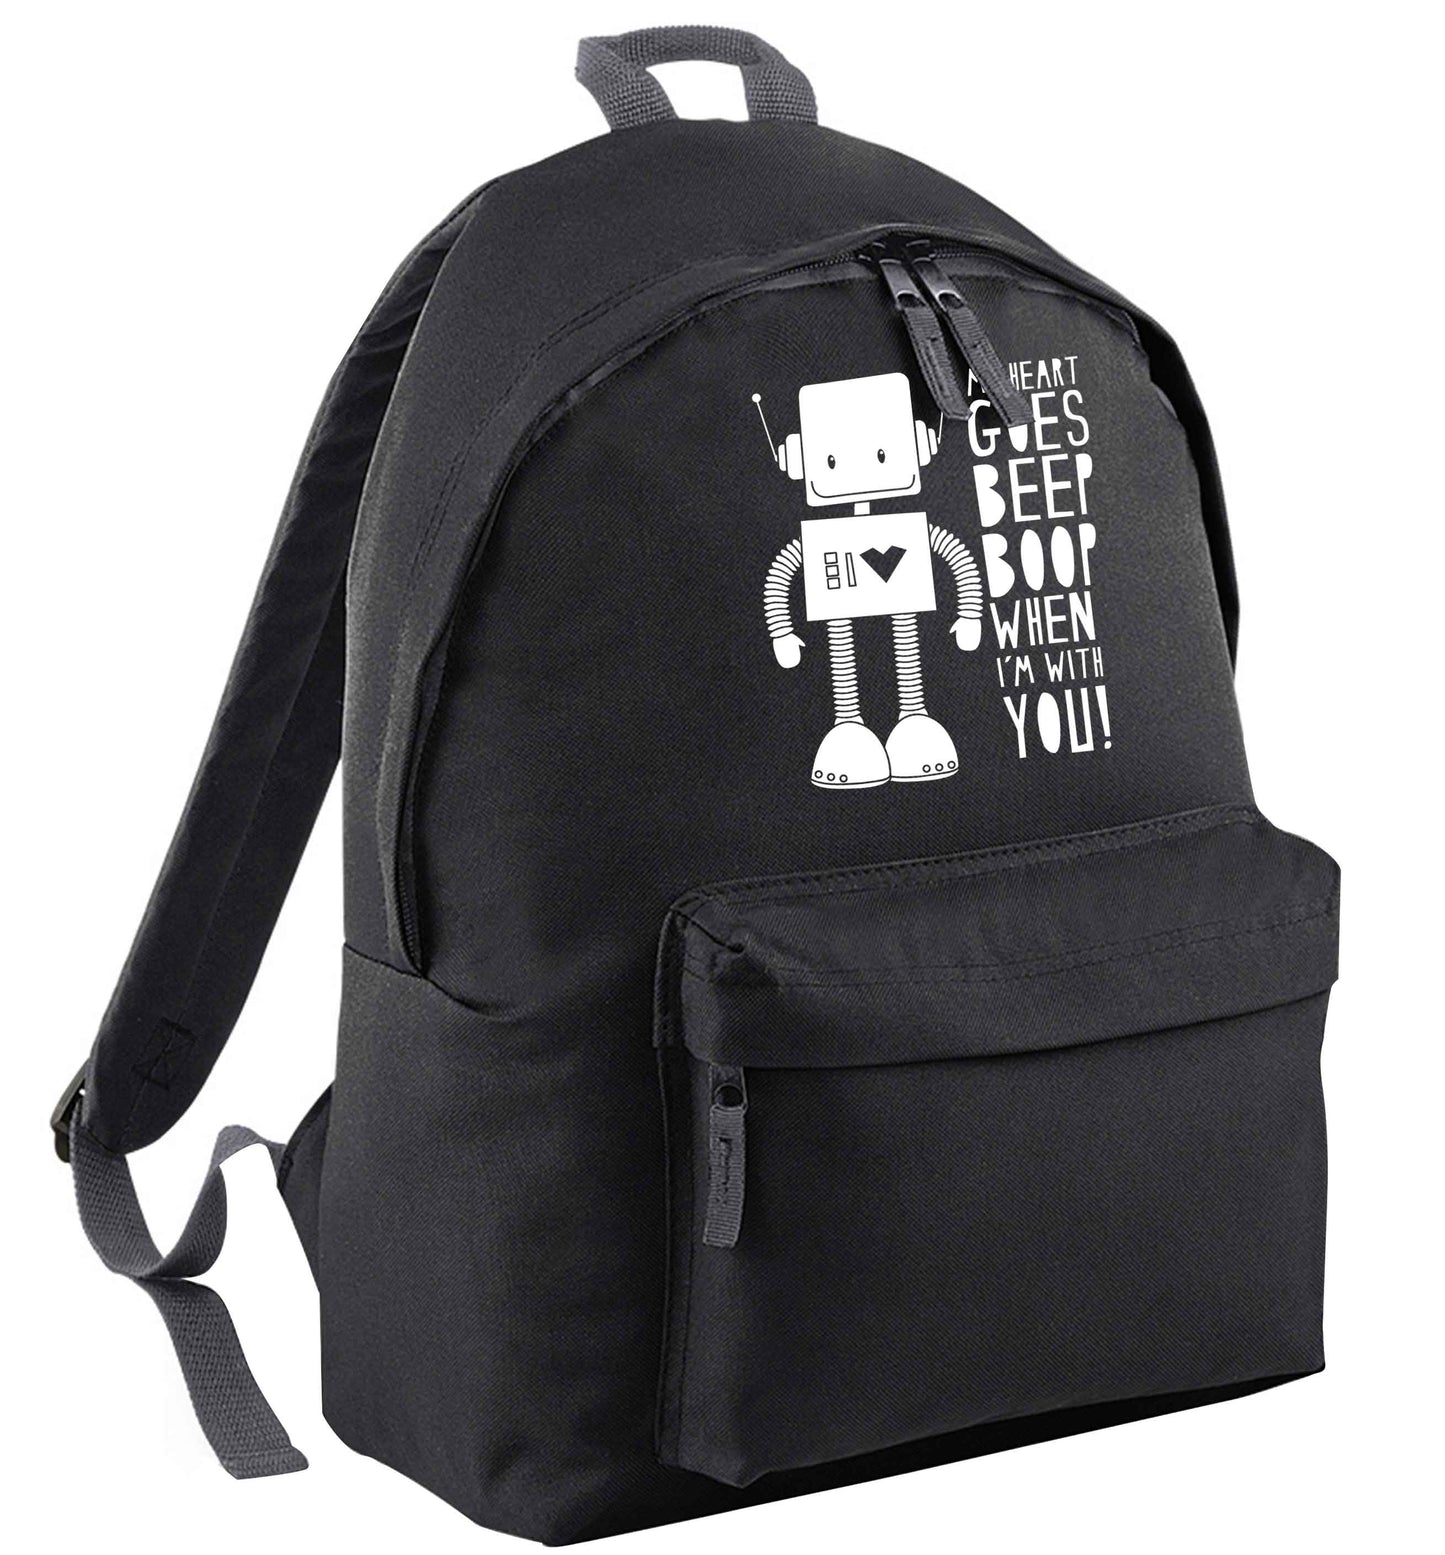 My heart goes beep boop when I'm with you | Children's backpack